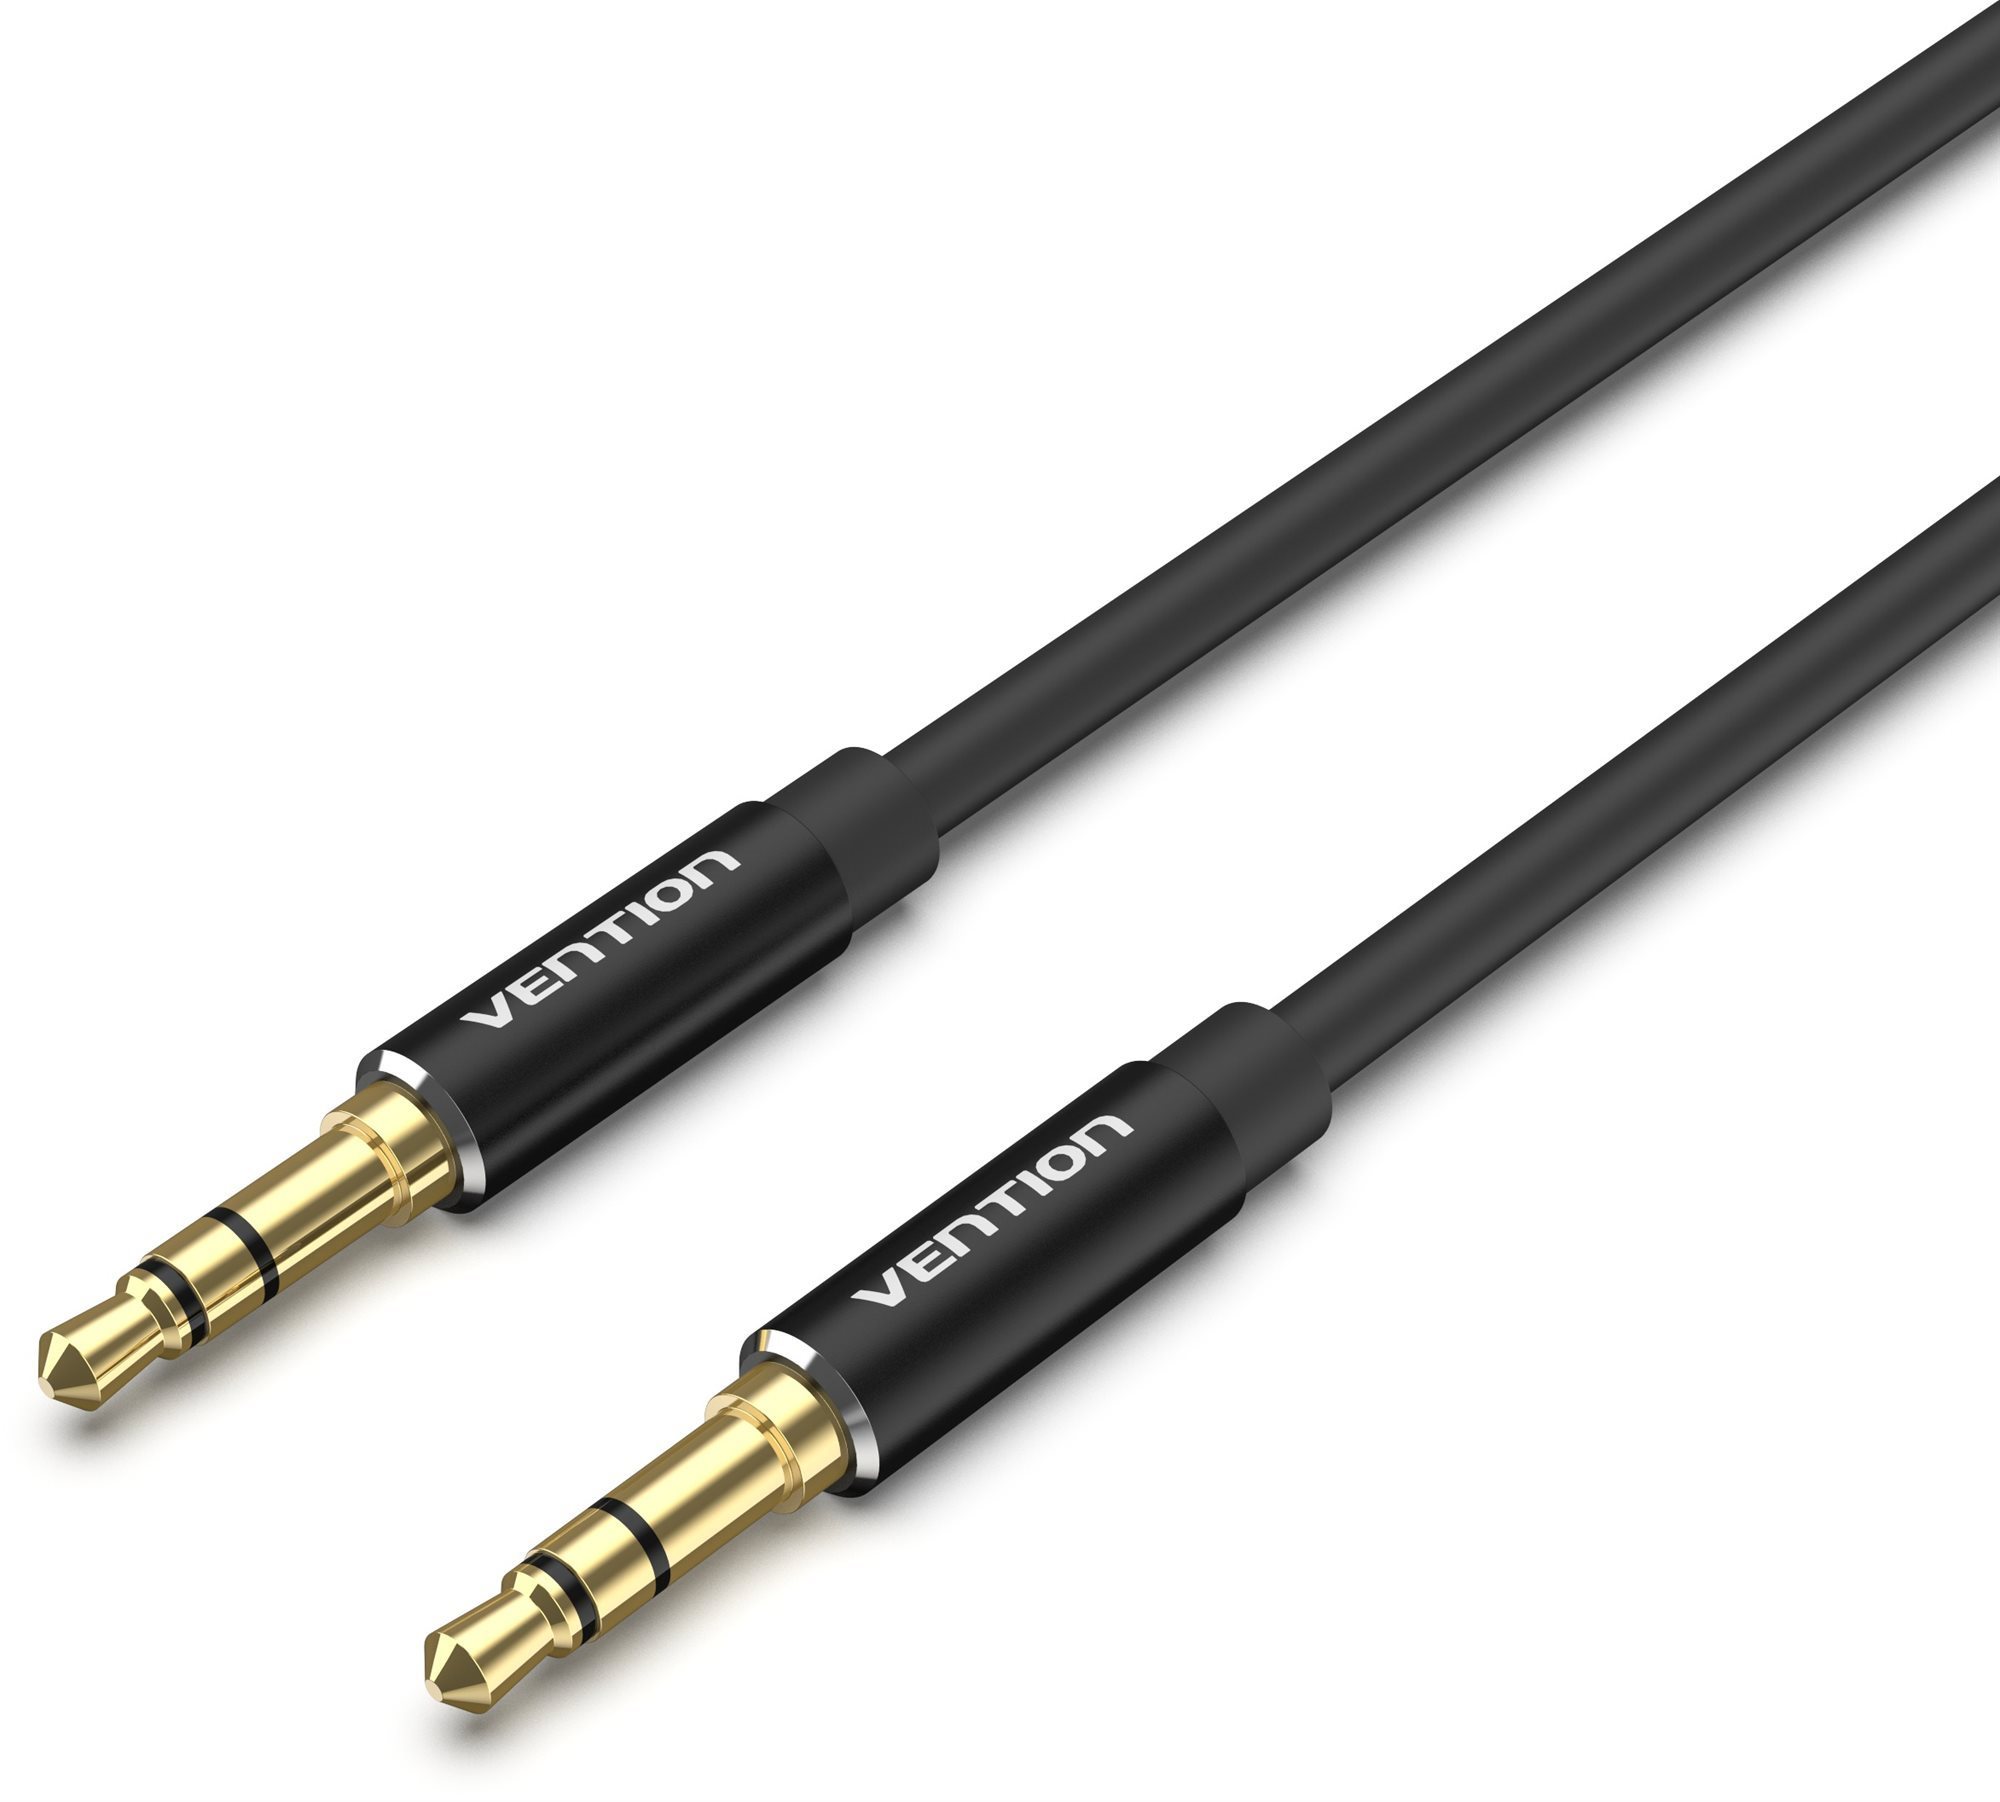 Vention 3,5 mm Male to Male Audio Cable 3 m Black Aluminum Alloy Type